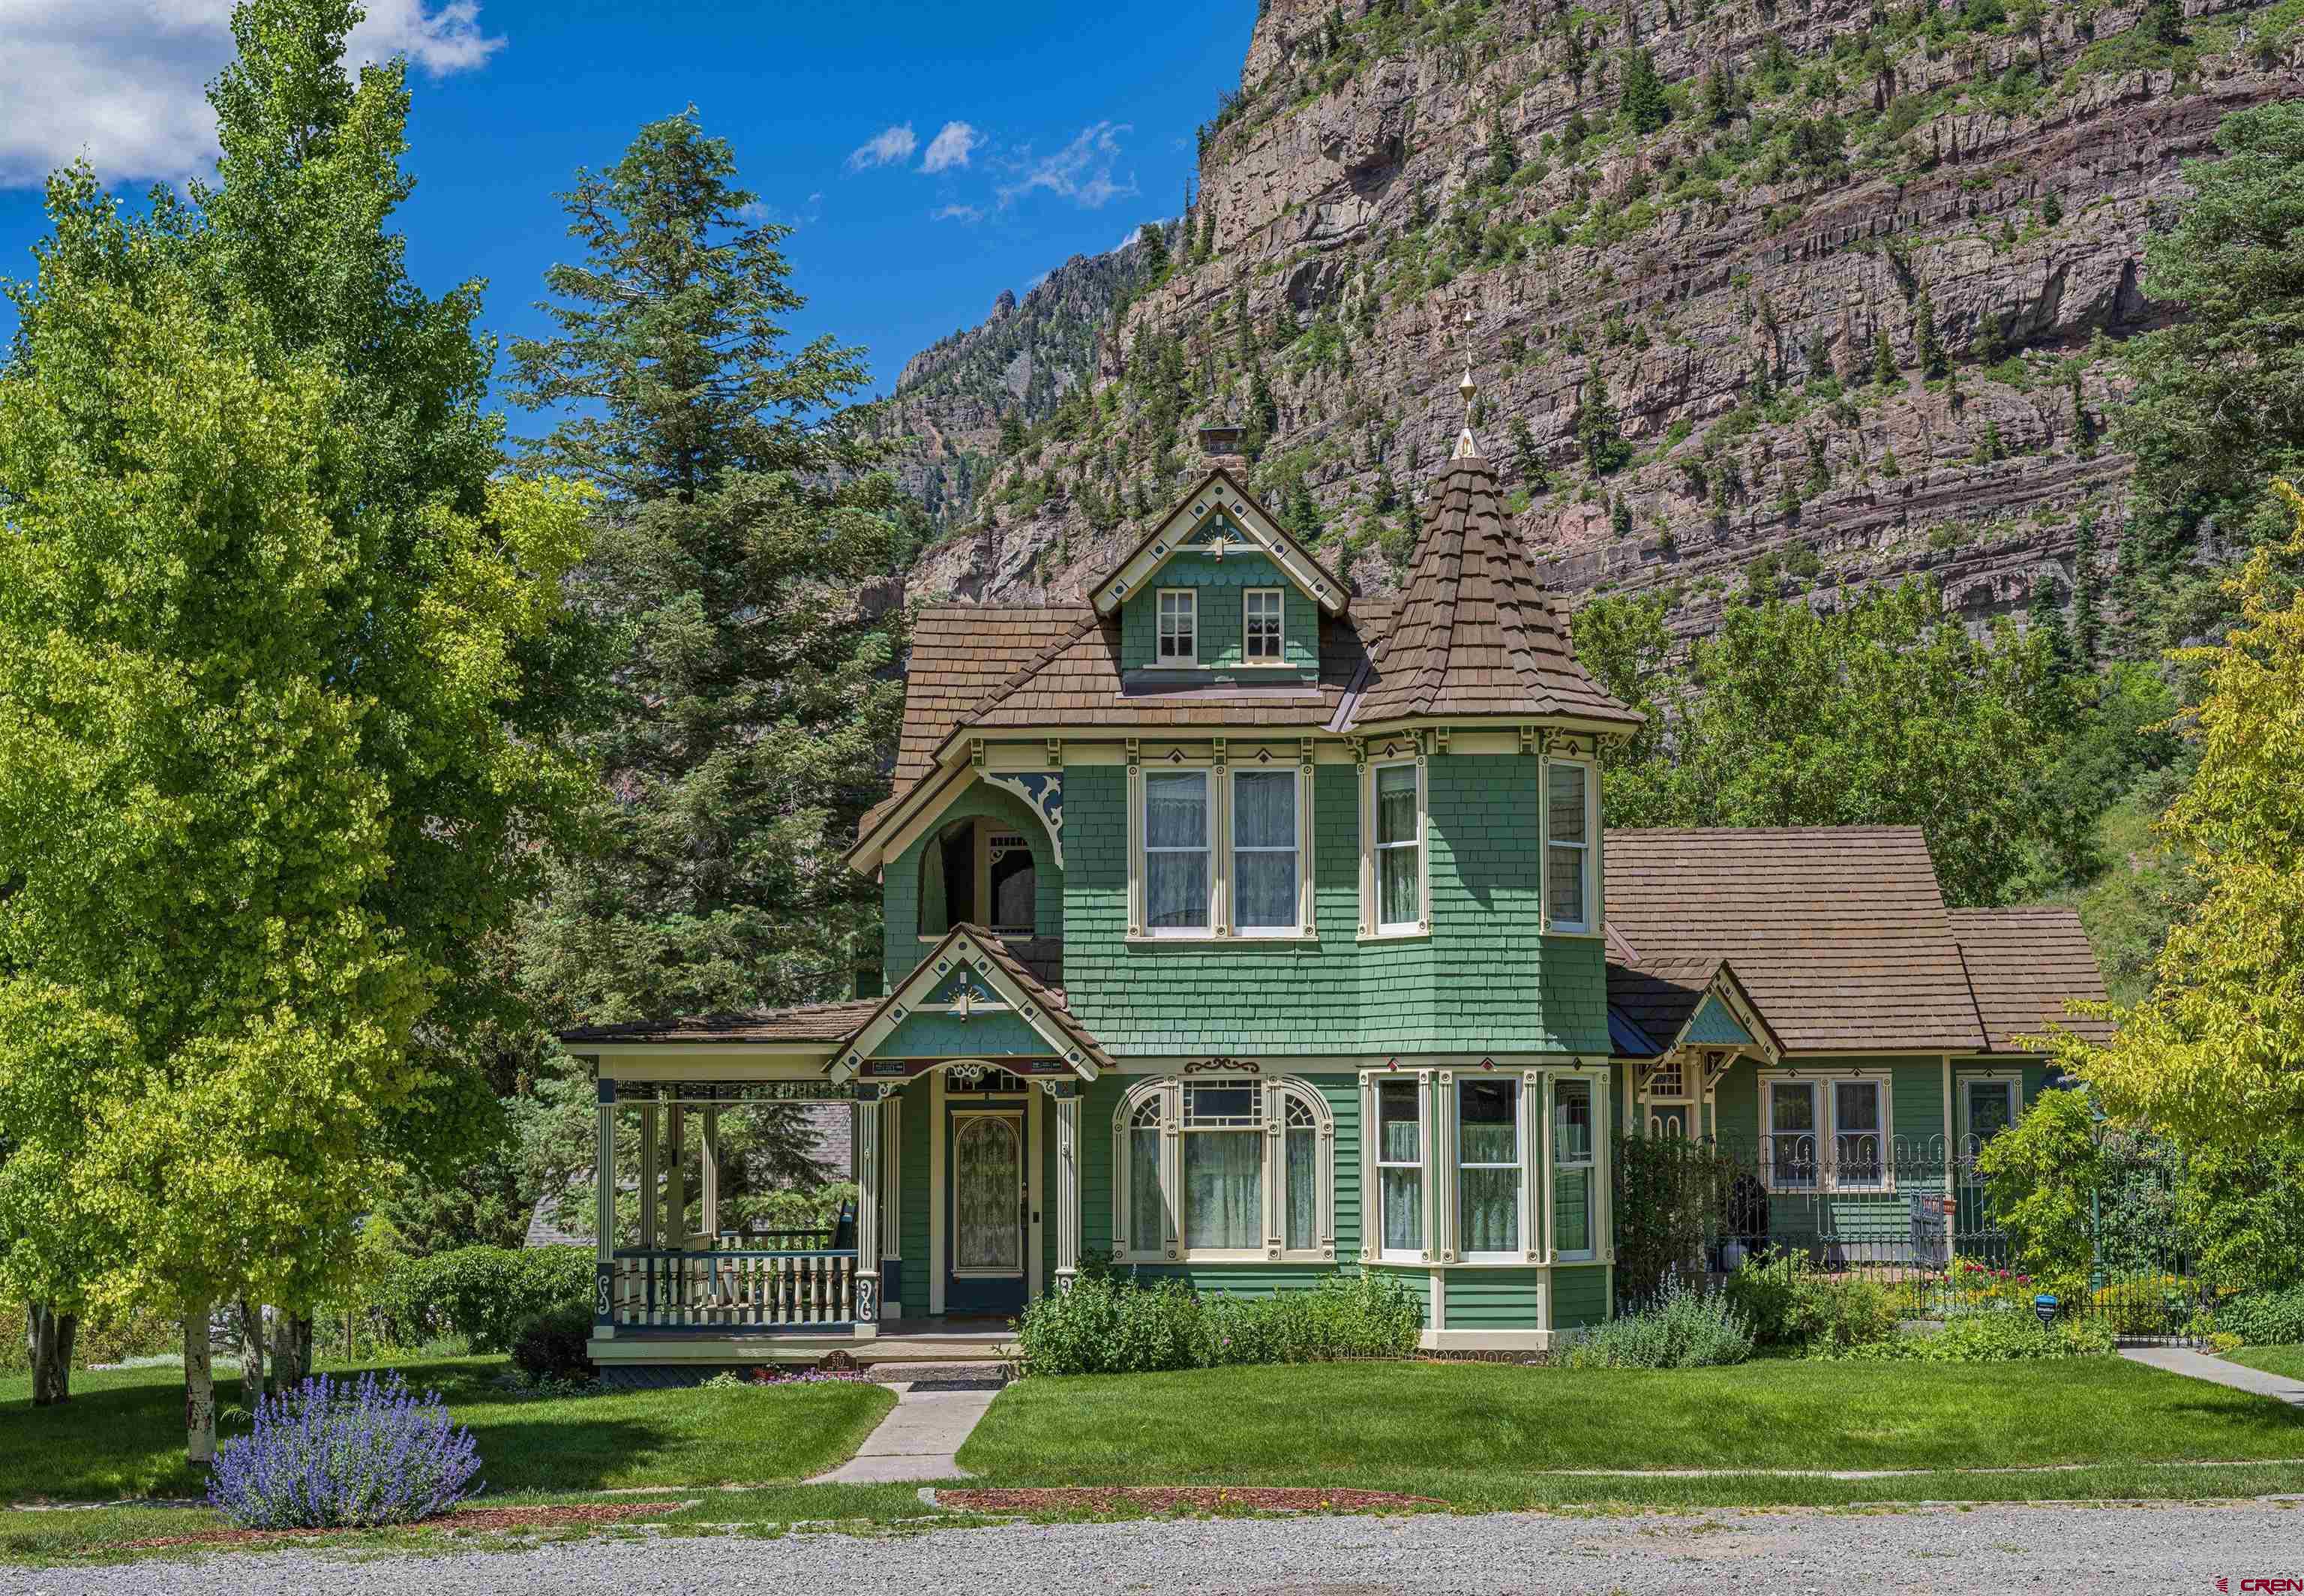 Timeless, Iconic Victorian home in Ouray.  This home is photographed more than any other home in Ouray.  Built in 1898 this beauty has been immaculately cared for through the years.  The home has two formal bedrooms and one flex bedroom with a sauna and murphy bed, a sitting area, an eyebrow deck and two bathrooms on the upper floor.  There is a large bedroom with a walk in closet and gorgeous bath on the main level along with the kitchen, dining room, parlor, library, butlers pantry, laundry, side entrance and half a bath. The lower level has a bunk room with four bunk beds and a queen bed along with an adorable kitchen, with red appliances, and a bath.  There is a separate entrance in the lowest level.  One could make this into an apartment for a care taker.   The kitchen has soap stone counter tops, period new appliances, an authentic old farm house sink, and beautiful cabinets with wainscoting doors to match the walls.  Two of the baths boast claw foot tubs.  Old push button light switches, beautiful hardwood and tile floors, gorgeous original trim, beautiful wallpaper, and antique fixtures are just a few of the many features adorning this home.  This home sits on four city lots and is full of perennials, aspen trees, a bocci ball court and a two car detached garage with storage above.  The roof was replaced two years ago with a composite product made to look like wood shingles with an 80 year guarantee.   The amenities are too many to list.  Come see this stunning home for yourself.